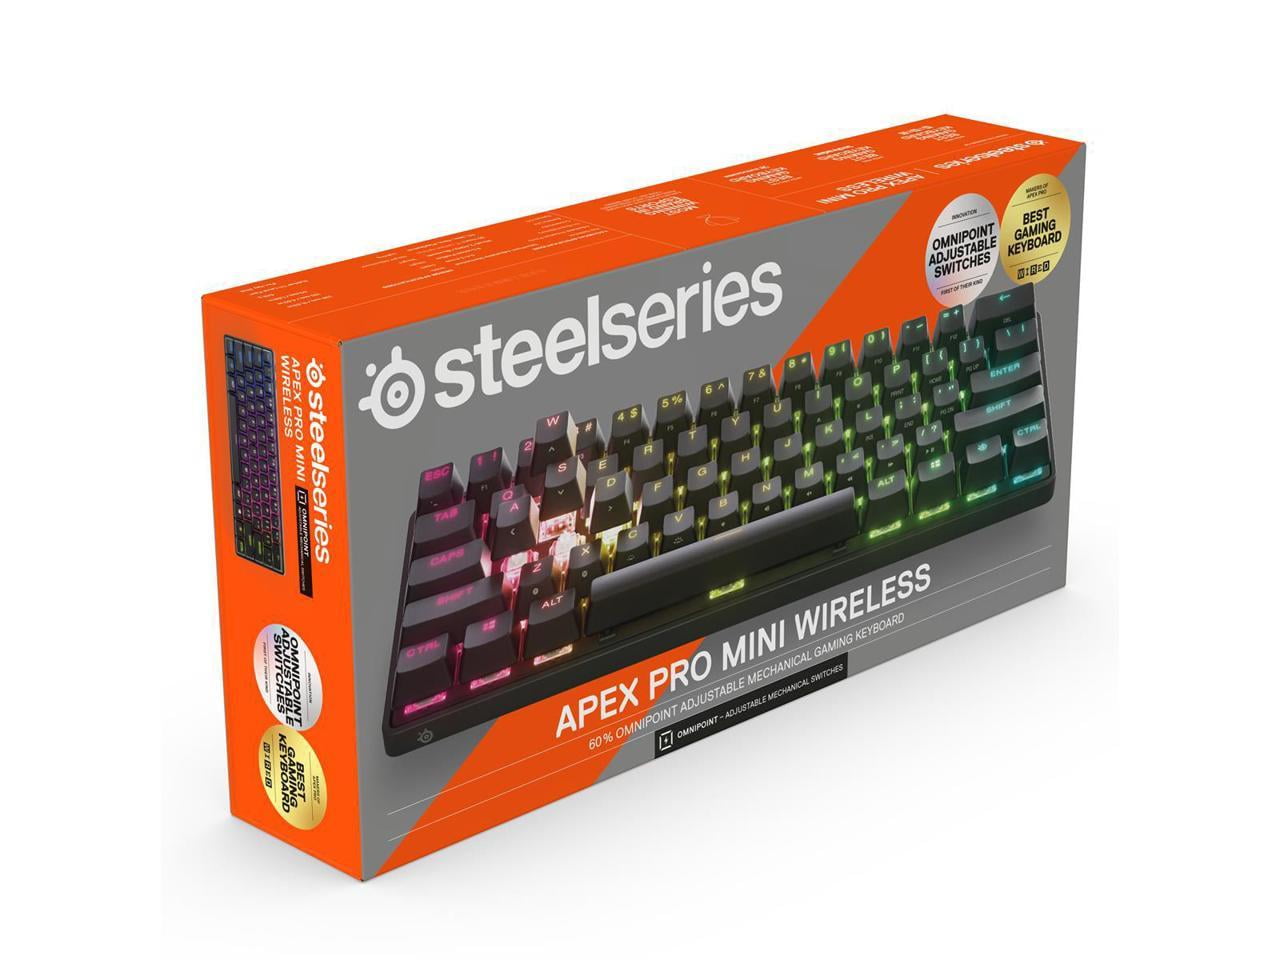 Steelseries Apex Pro Mini Wireless Review: The Best Compact Gaming